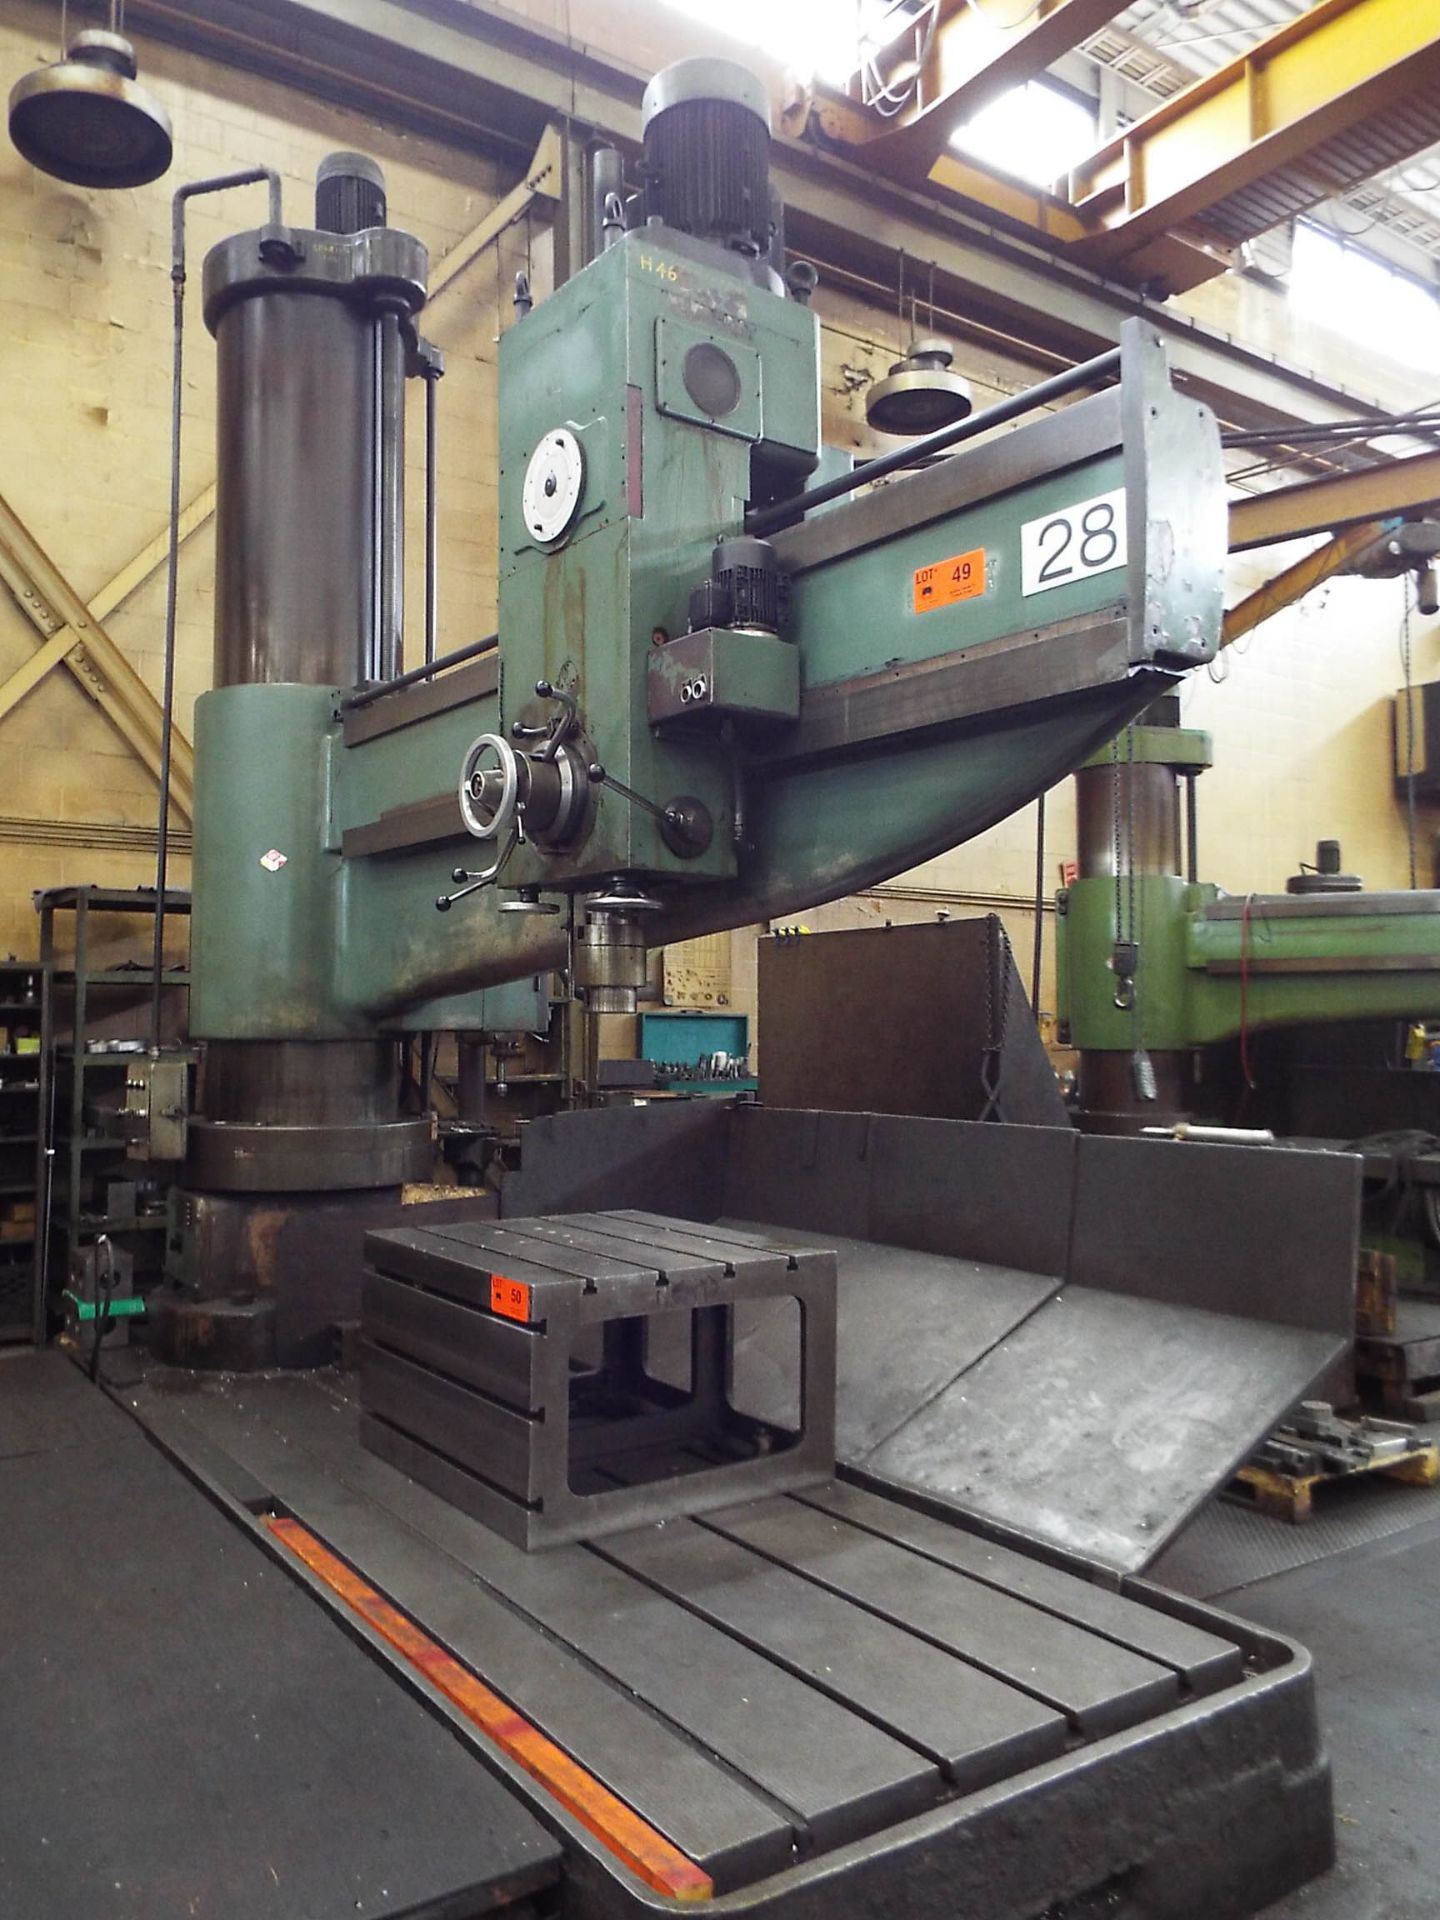 UCIMU 10' RADIAL ARM DRILL WITH APPROX. 30" COLUMN, SPEEDS TO 1470 RPM, S/N: 55489 (CI) (LOCATED